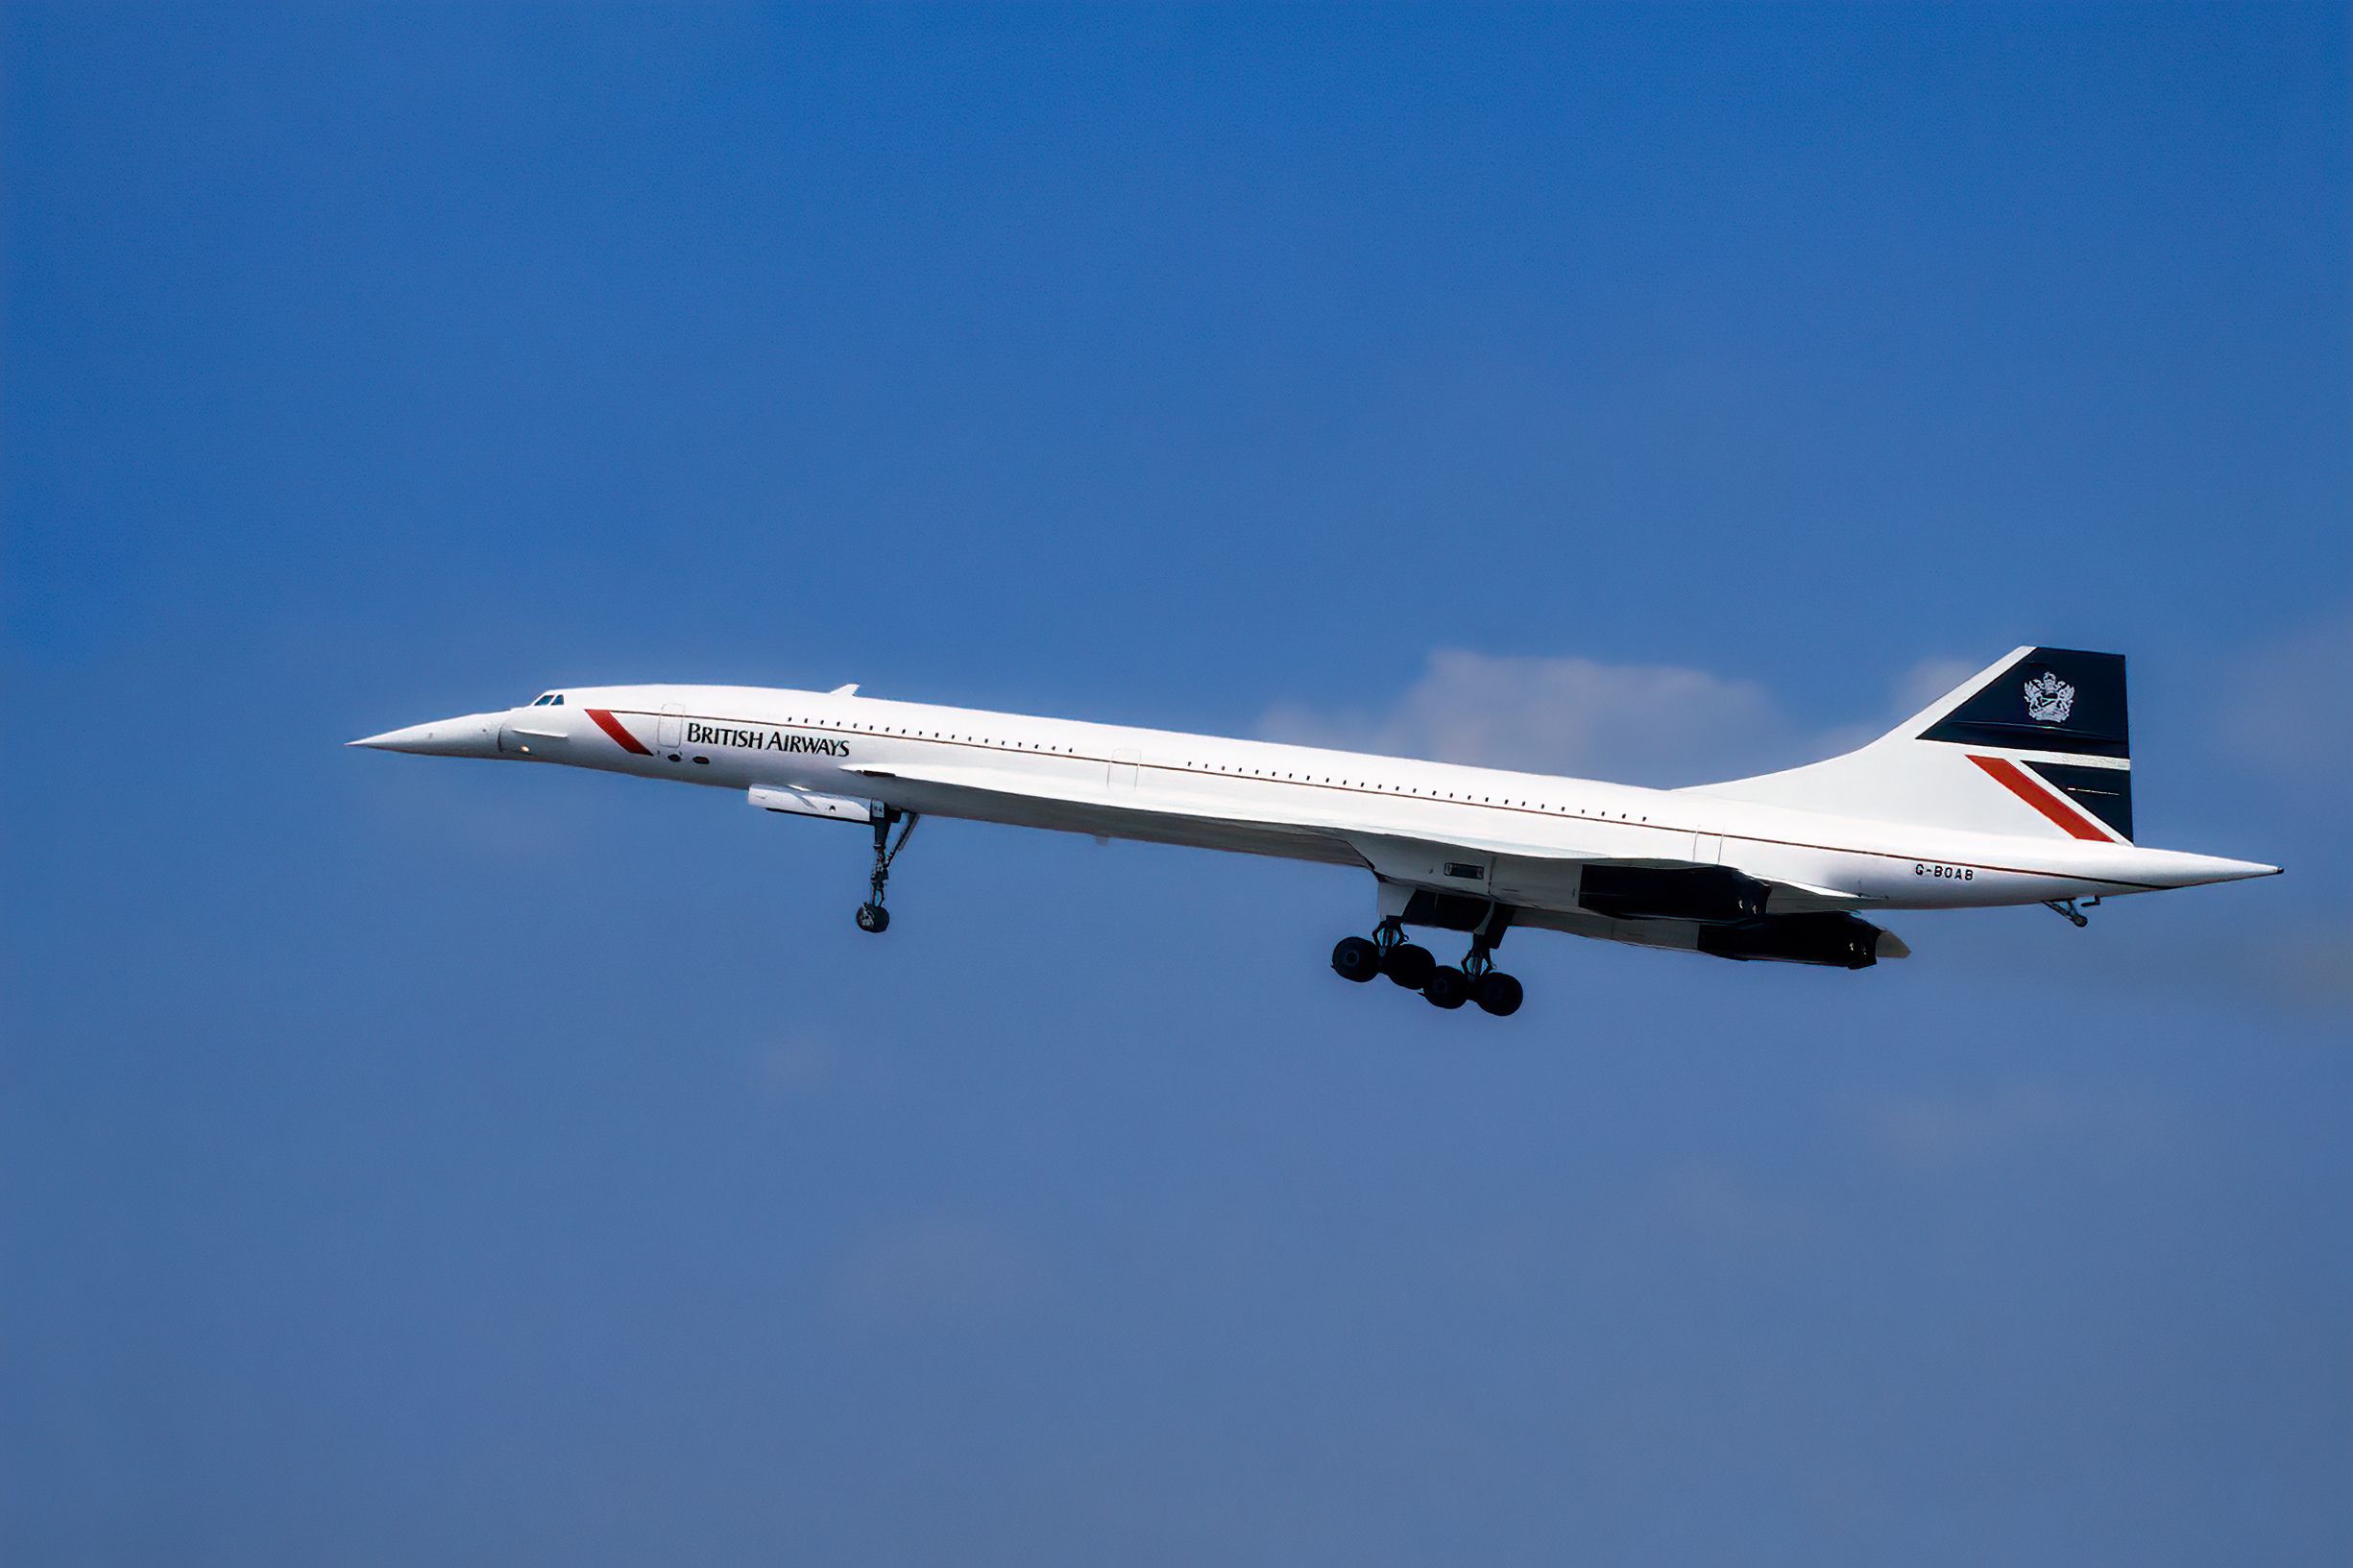 A British Airways Concorde taking off with landing gear still extended.